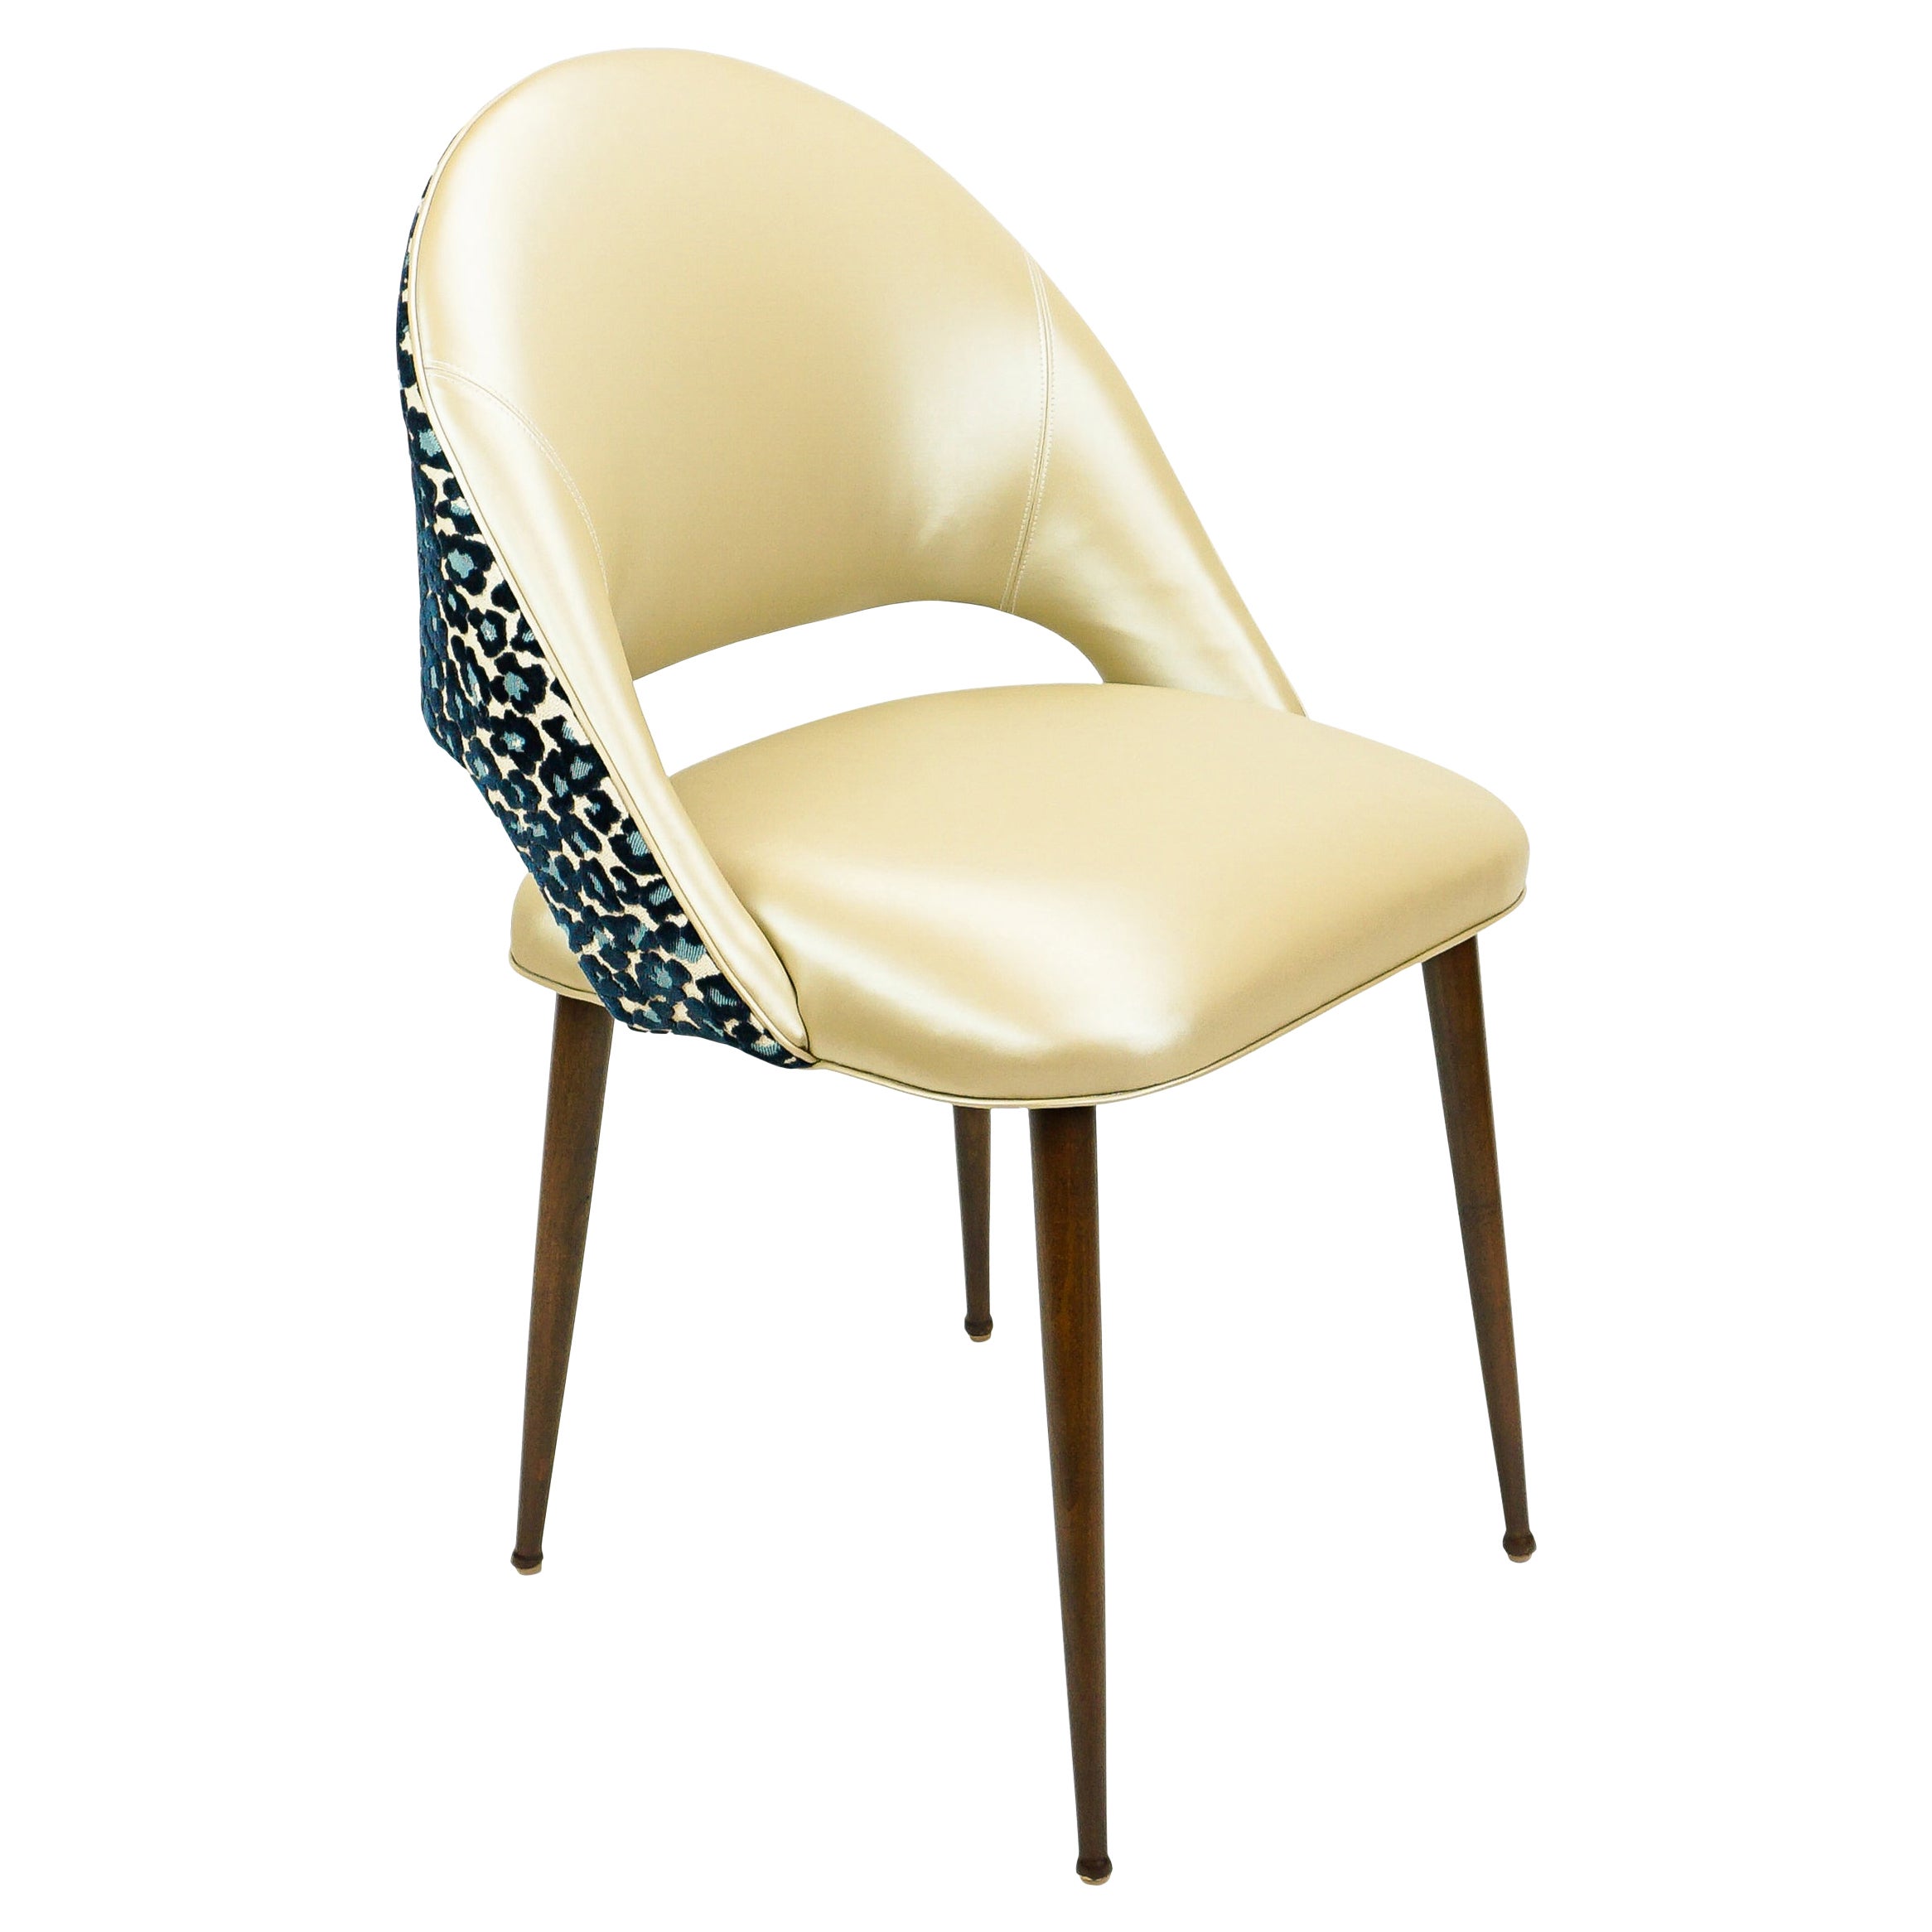 Golden Vinyl Dining Chair with Blue Leopard Back For Sale